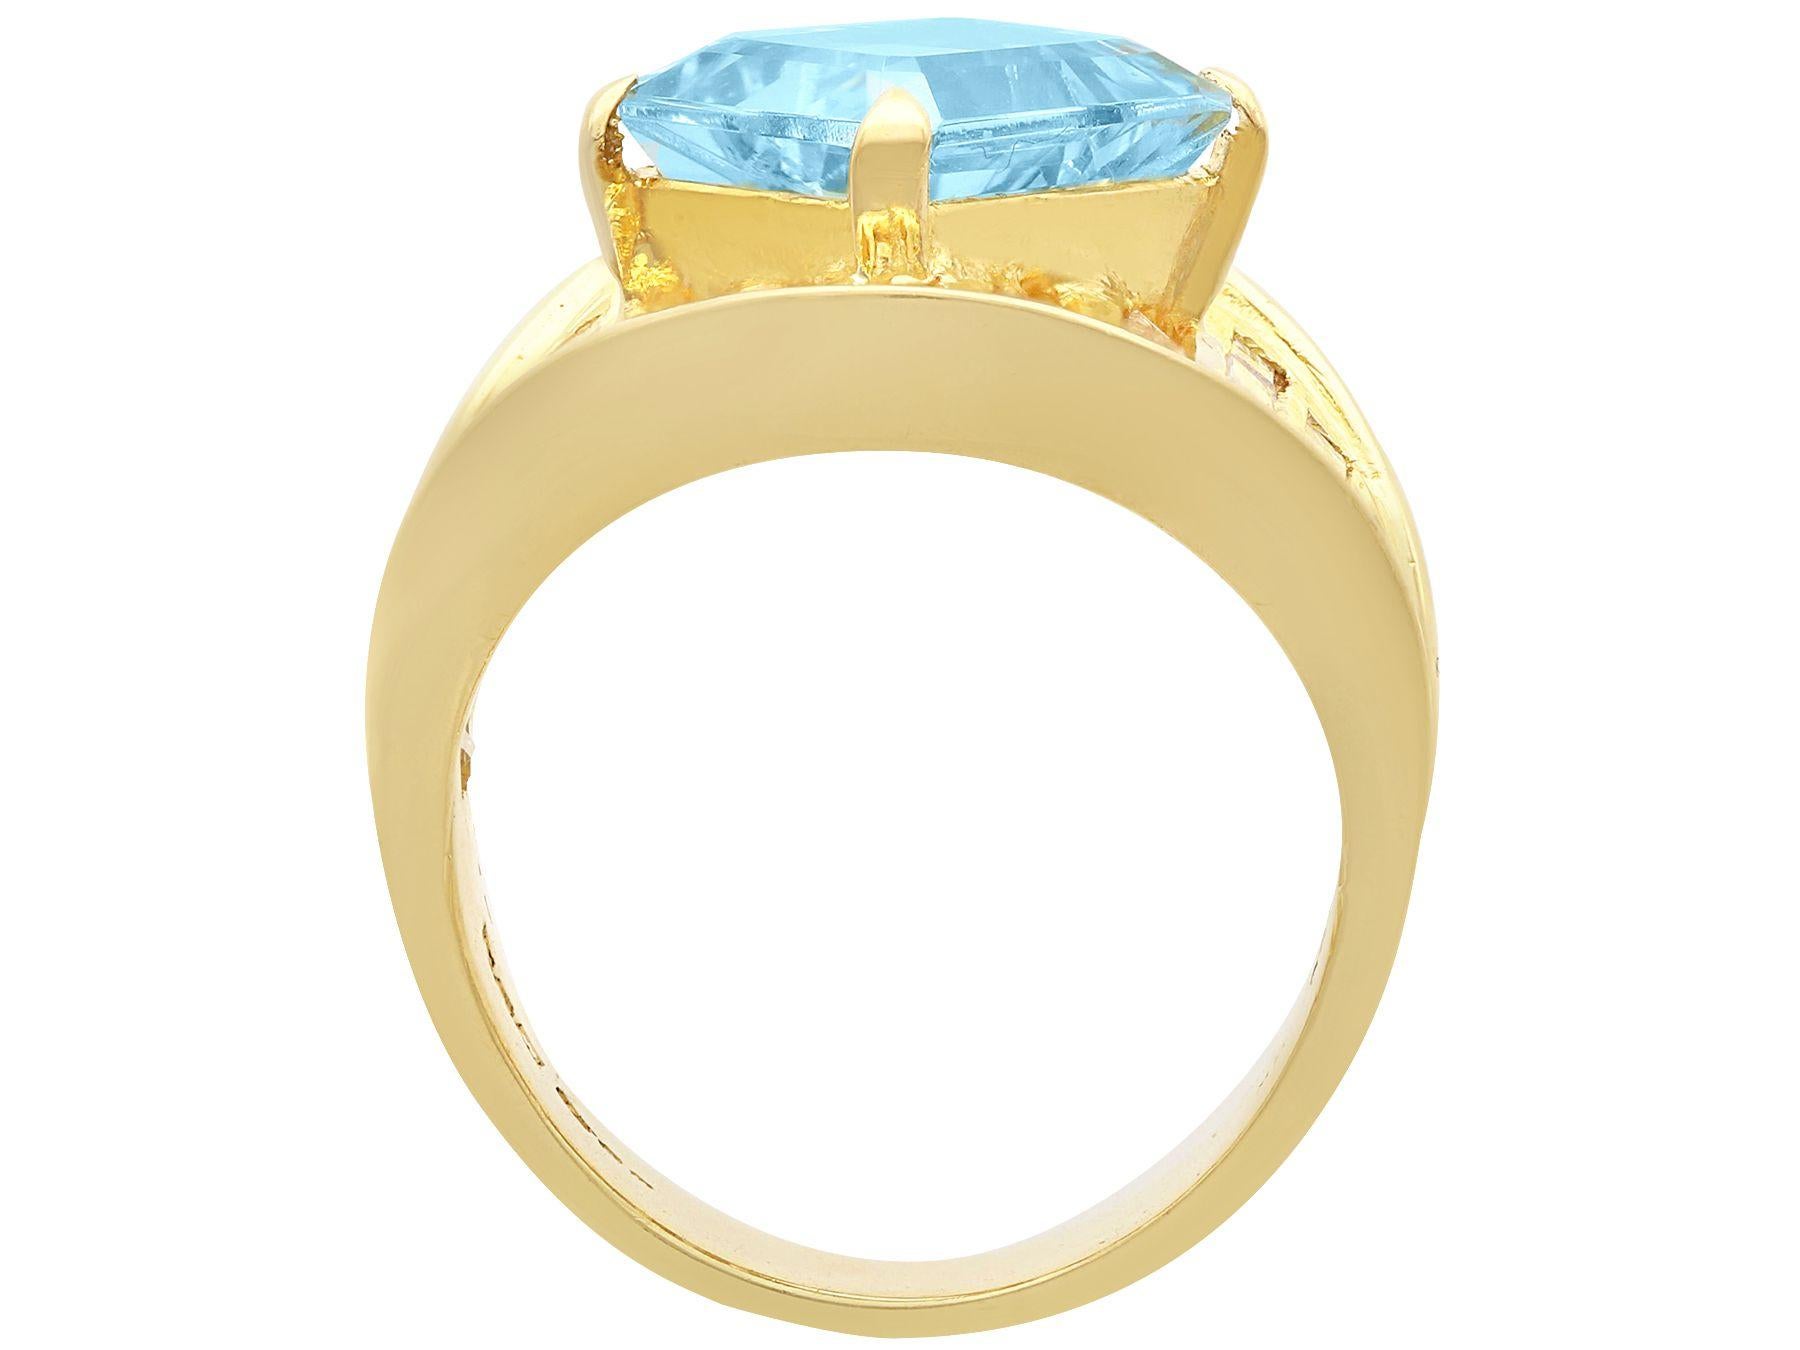 3.33 Carat Aquamarine and 1.55 Carat Diamond Yellow Gold Cocktail Ring In Excellent Condition For Sale In Jesmond, Newcastle Upon Tyne